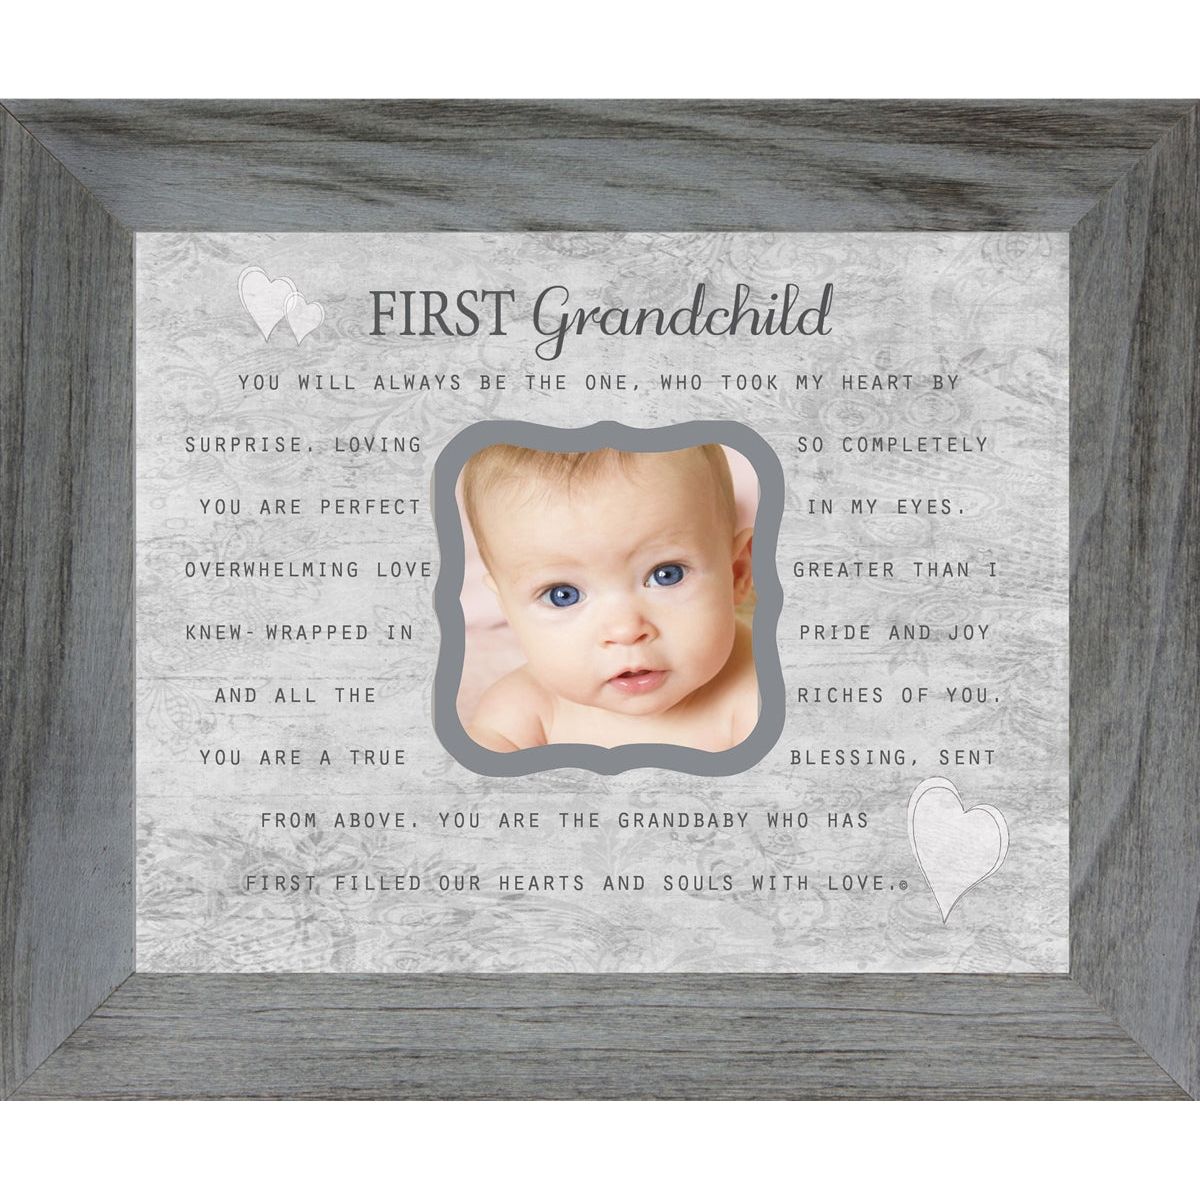 8x10 distressed gray real wood frame. Gray artwork with &quot;First Grandchild&quot; poem.  Artwork has a cut out for a photo.